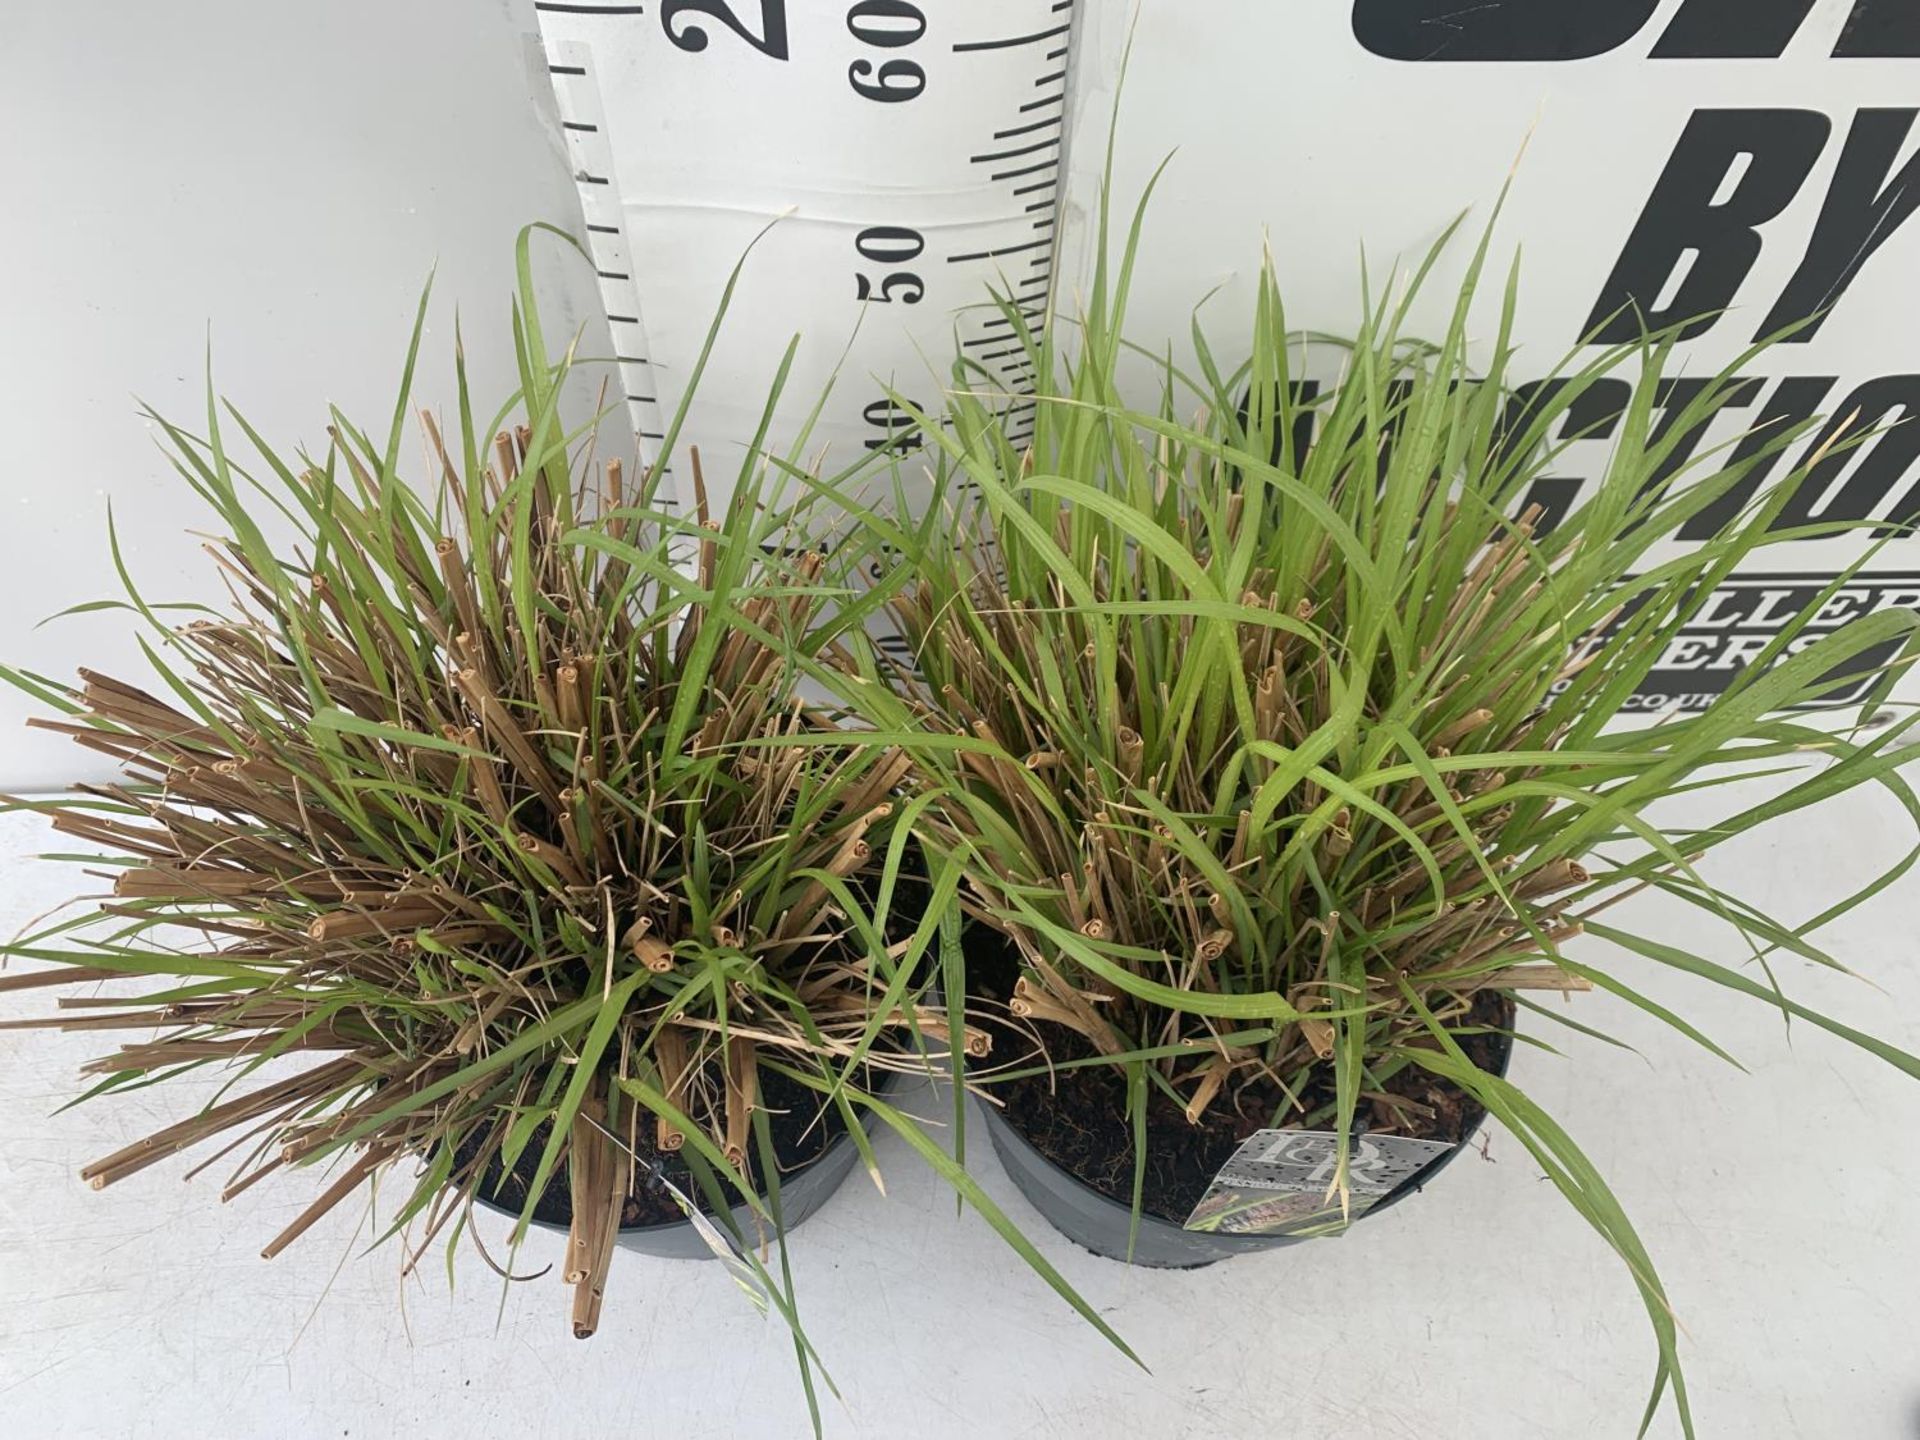 TWO ORNAMENTAL GRASSES 'PENNISETUM VIRIDESCENS' IN 10 LTR POTS APPROX 60CM IN HEIGHT PLUS VAT TO - Image 2 of 4